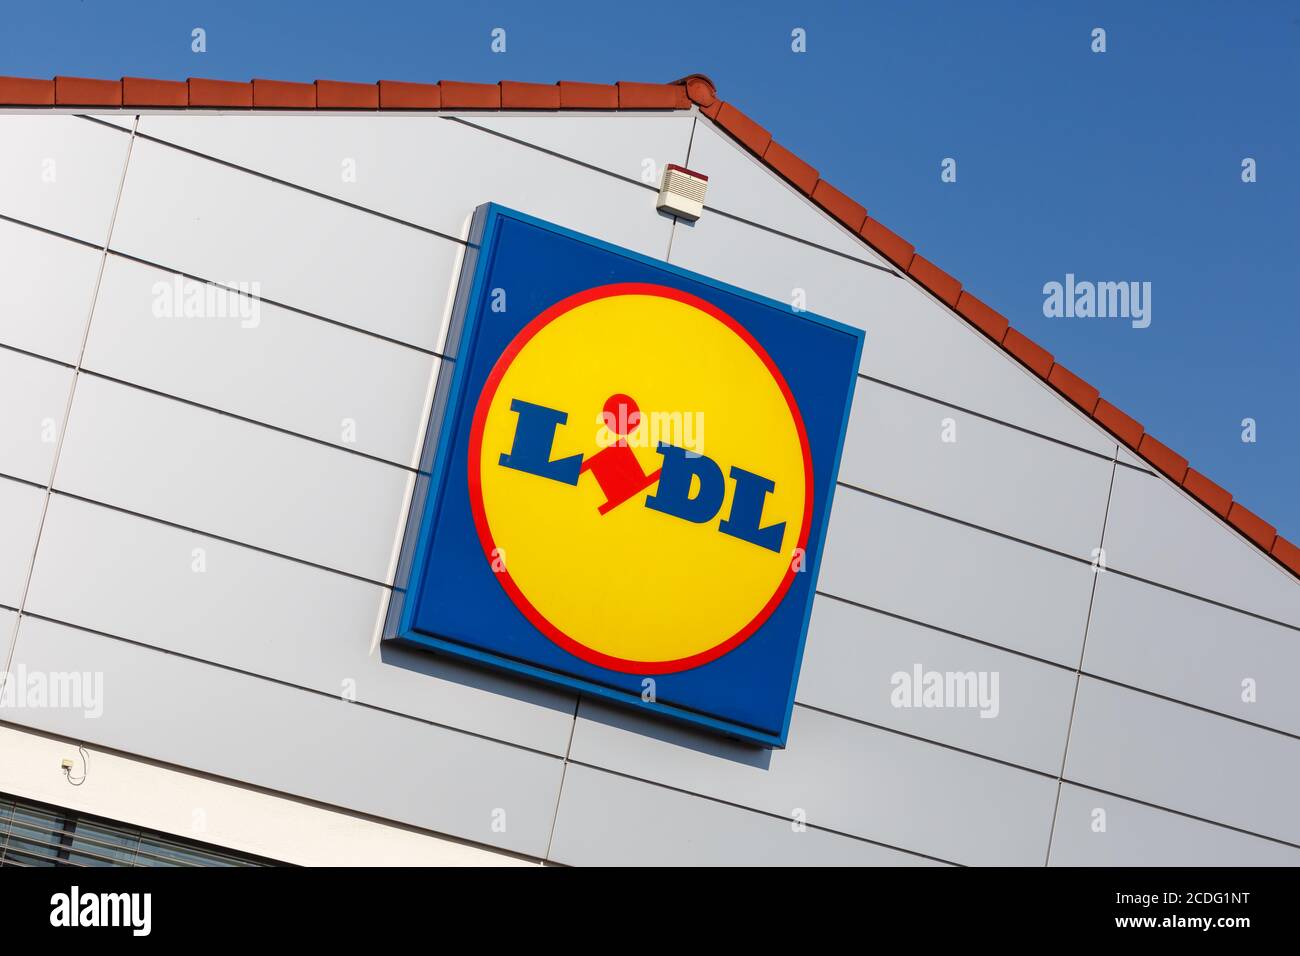 Stuttgart, Germany - May 17, 2020: Lidl logo sign supermarket discount shop discounter in Germany. Stock Photo